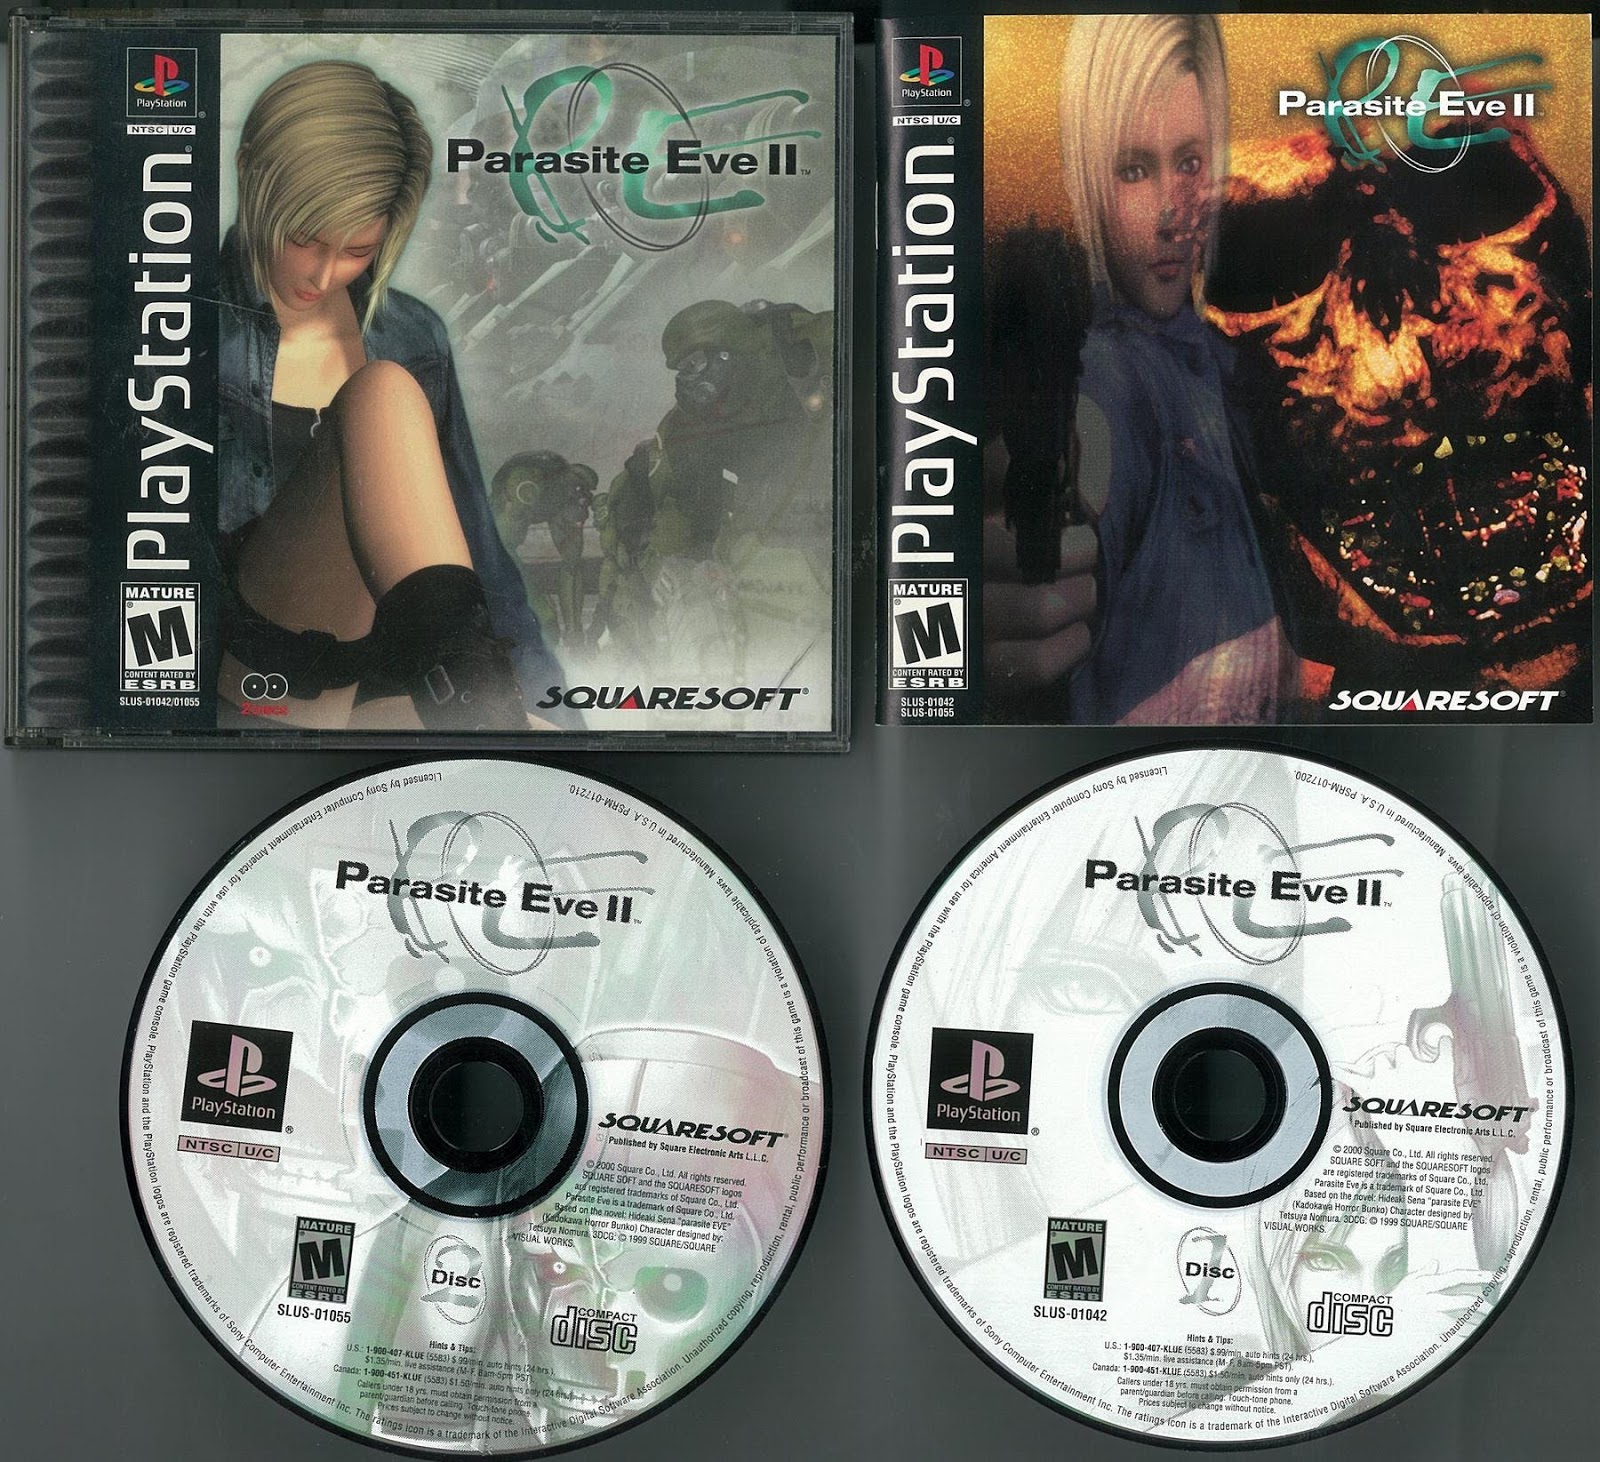 Parasite Eve 2 is the sequence... sequel to Square's 'Cinematic R...